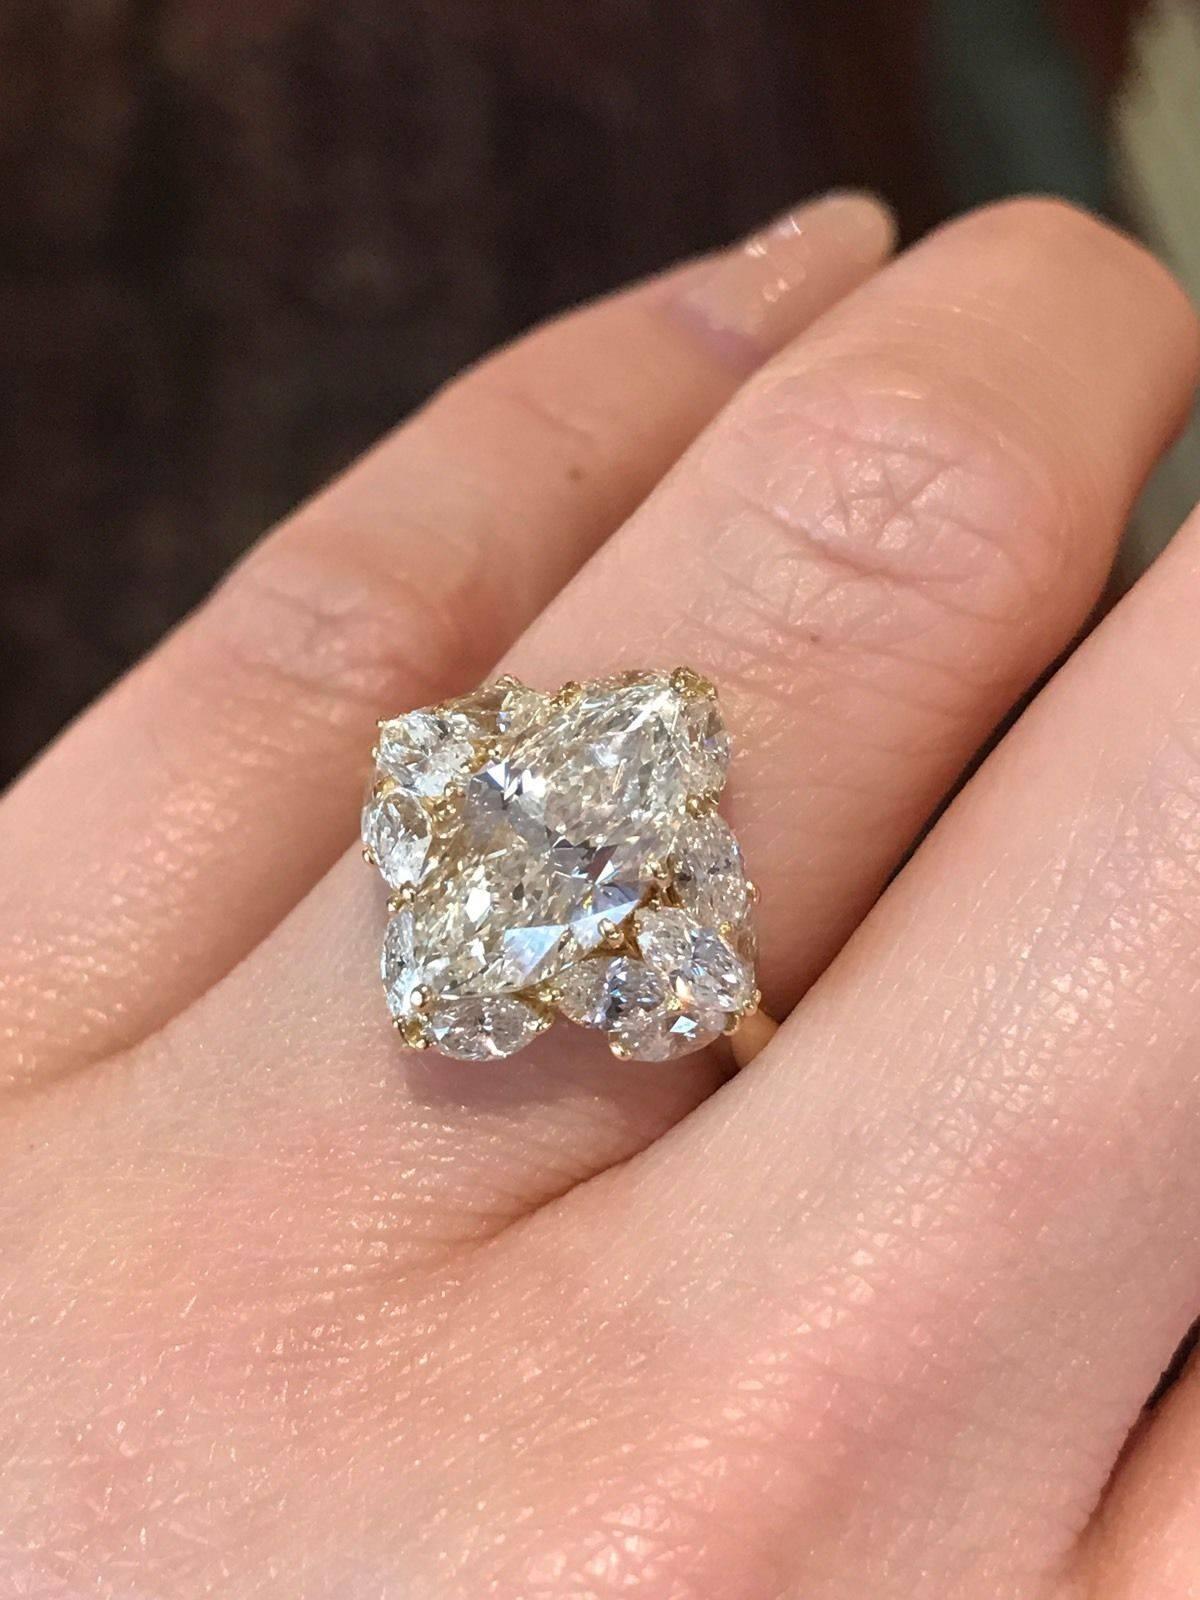 Marquise shape diamond in the center weighing 3.06 carats, surrounded by 14 Marquise Diamonds weighing total of 2.08 carats. The center diamond is SI1 clarity, Light Yellow in color. The side diamonds are VS clarity, H color. Ring weights 5.7 grams.